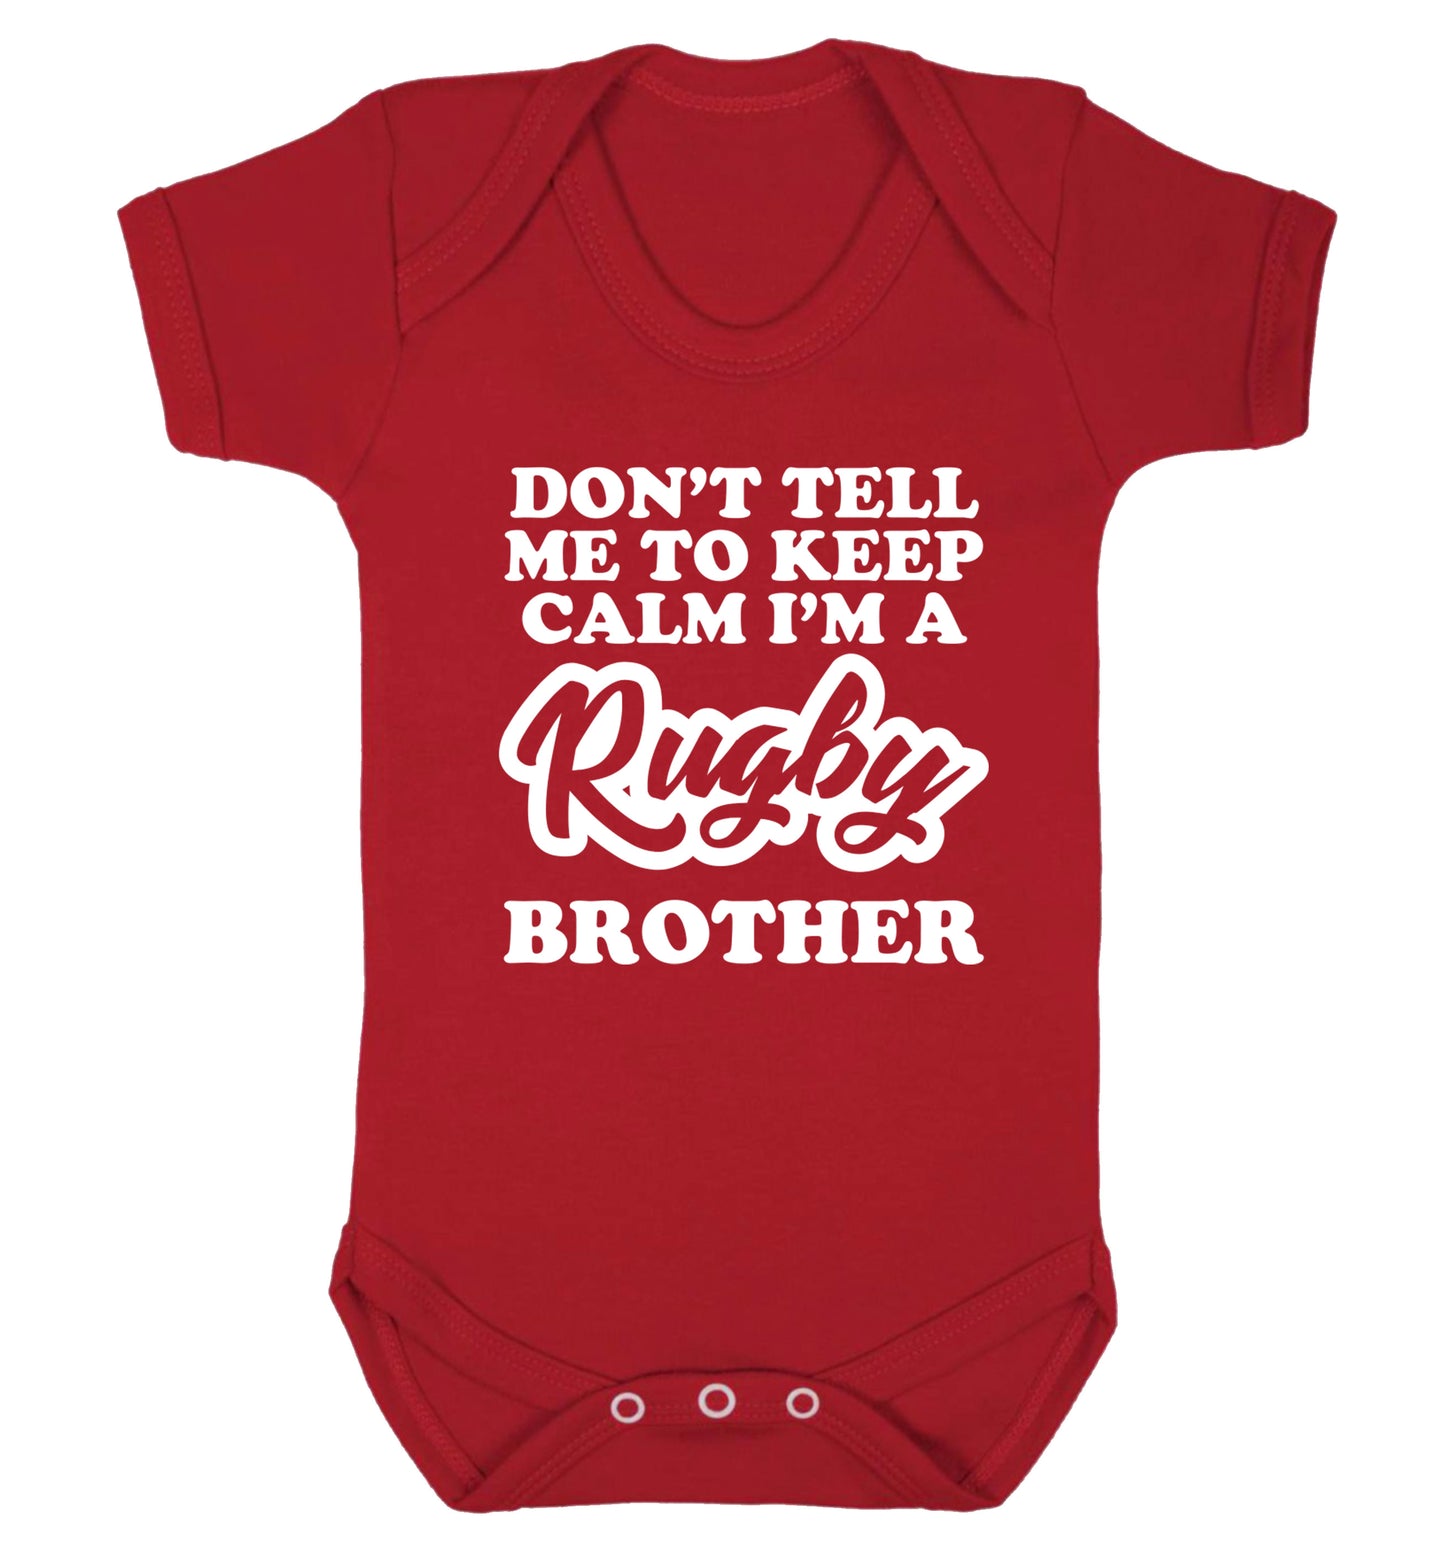 Don't tell me keep calm I'm a rugby brother Baby Vest red 18-24 months